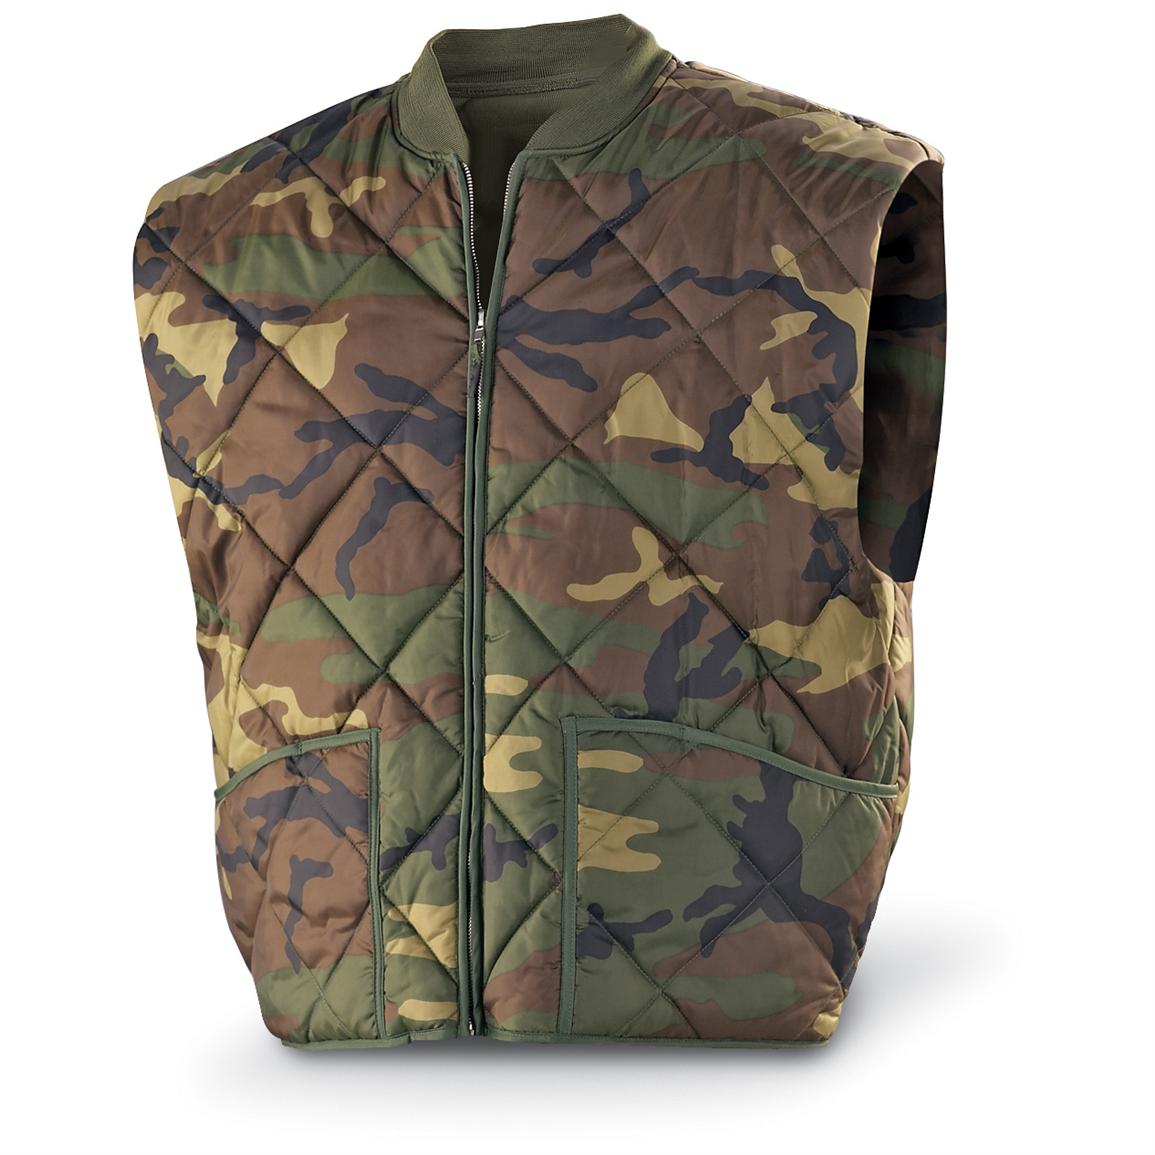 Military-style Big & Tall Quilted Military Surplus Vest - 582459, Vests at Sportsman's Guide